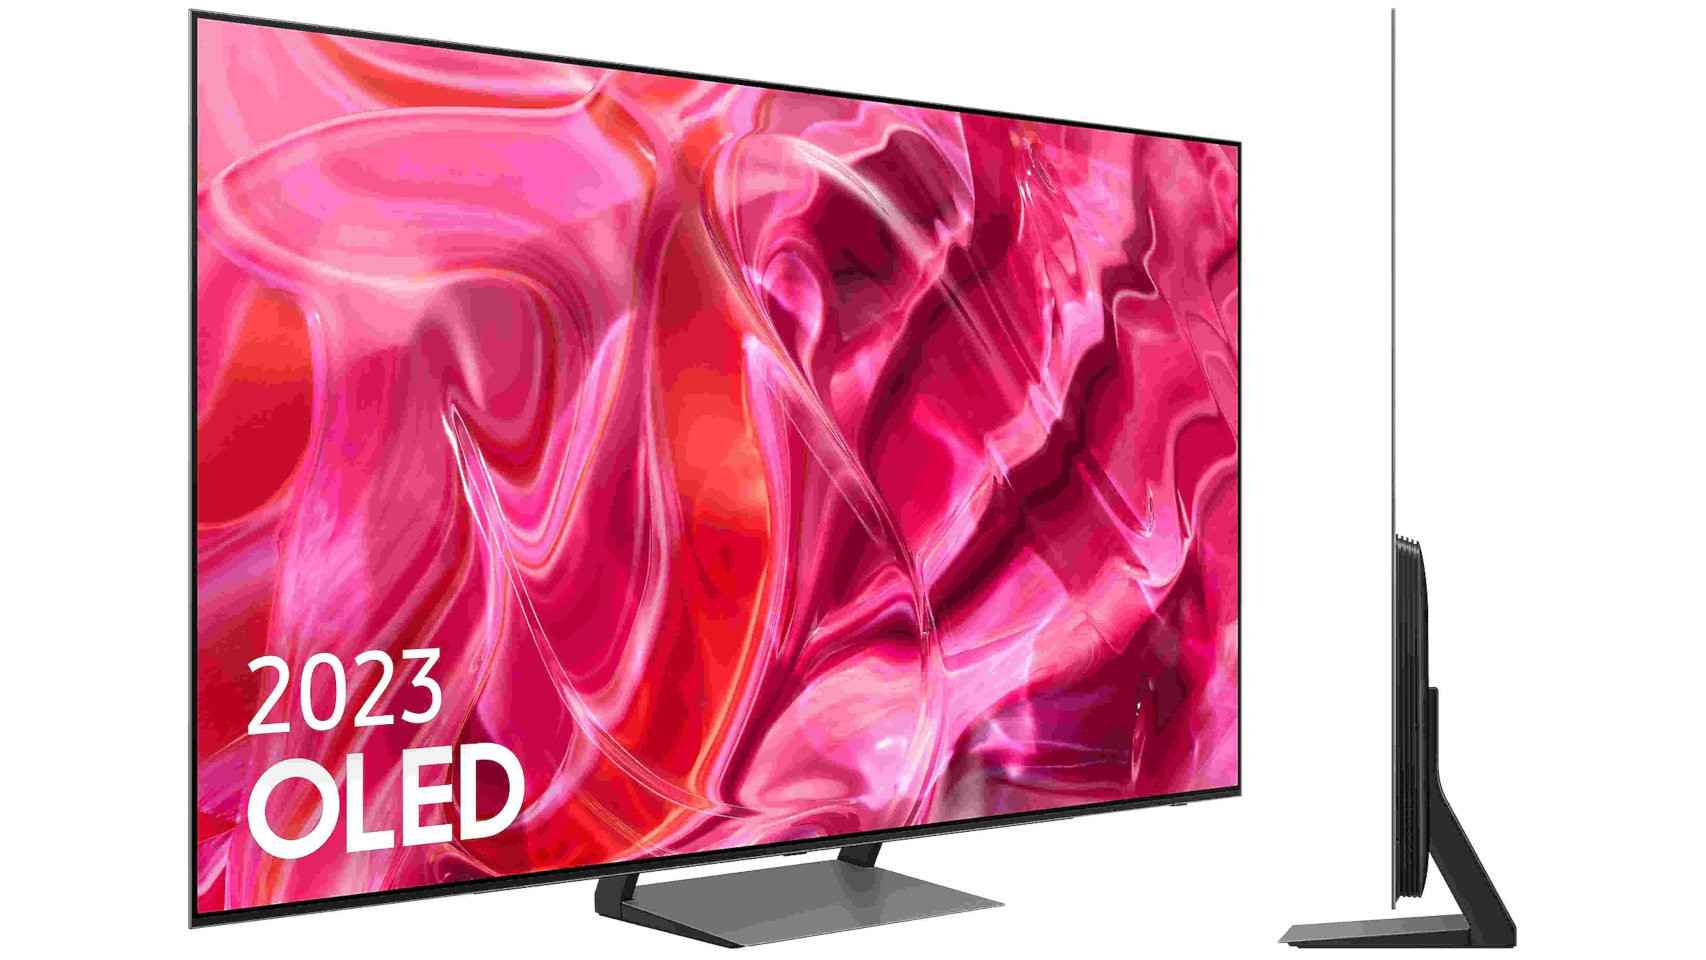 Samsung OLED TVs by 2023